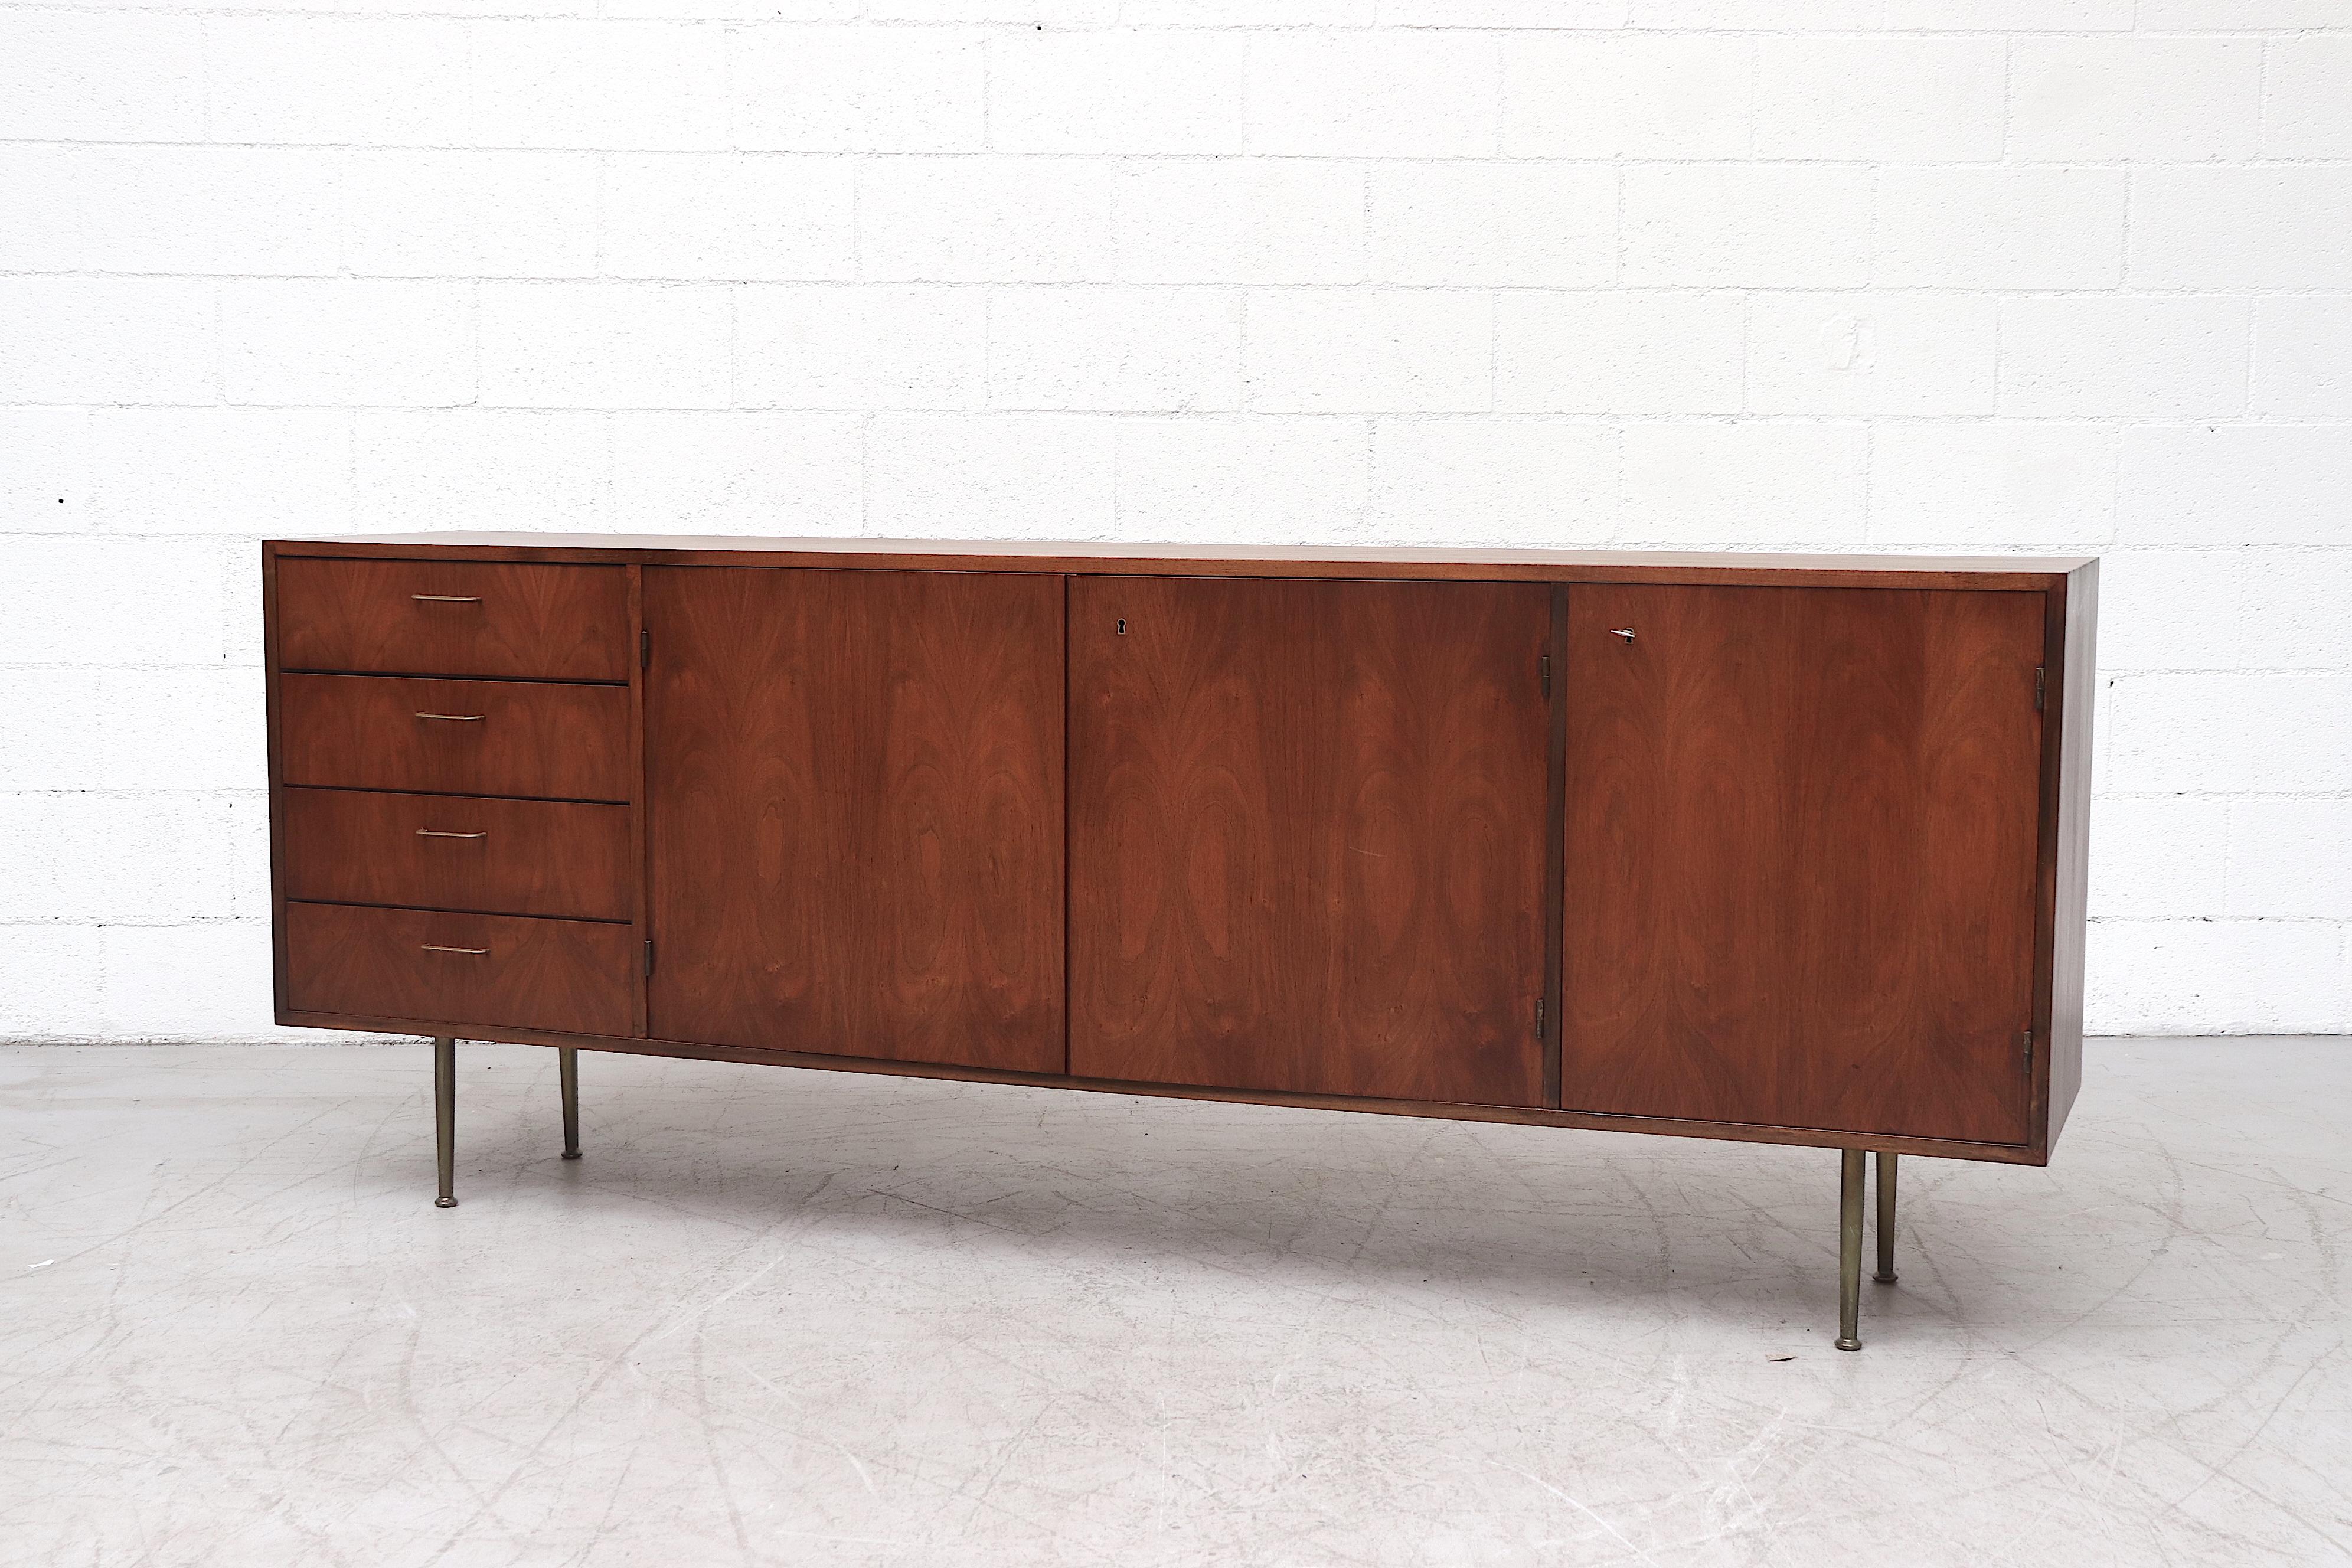 Beautiful mid-century teak credenza lightly refinished with amazing wood grain. Four side stacked drawers, all with delicate brass handles. Top drawer is felt lined with flatware storage. Double storage cabinets and bottle /glass storage in the